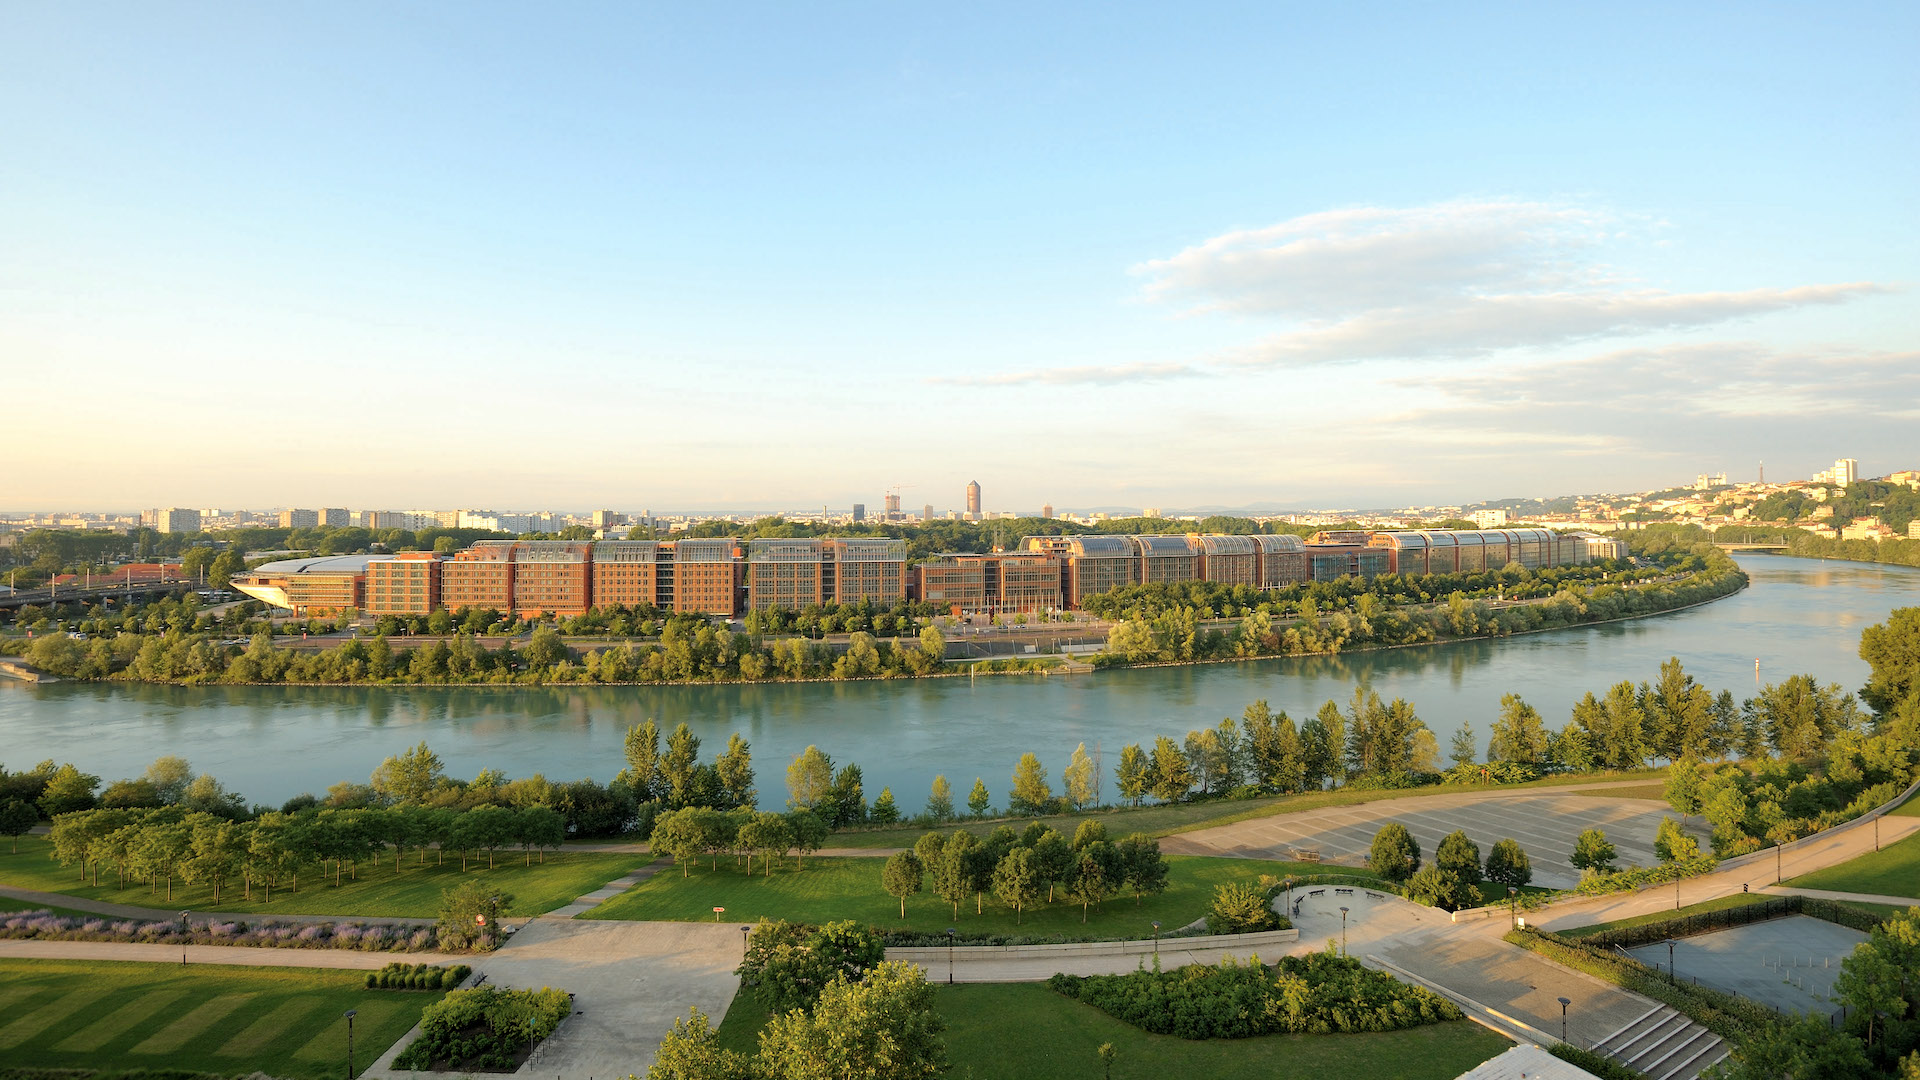 Photo of the Lyon Congress Center and river beyond